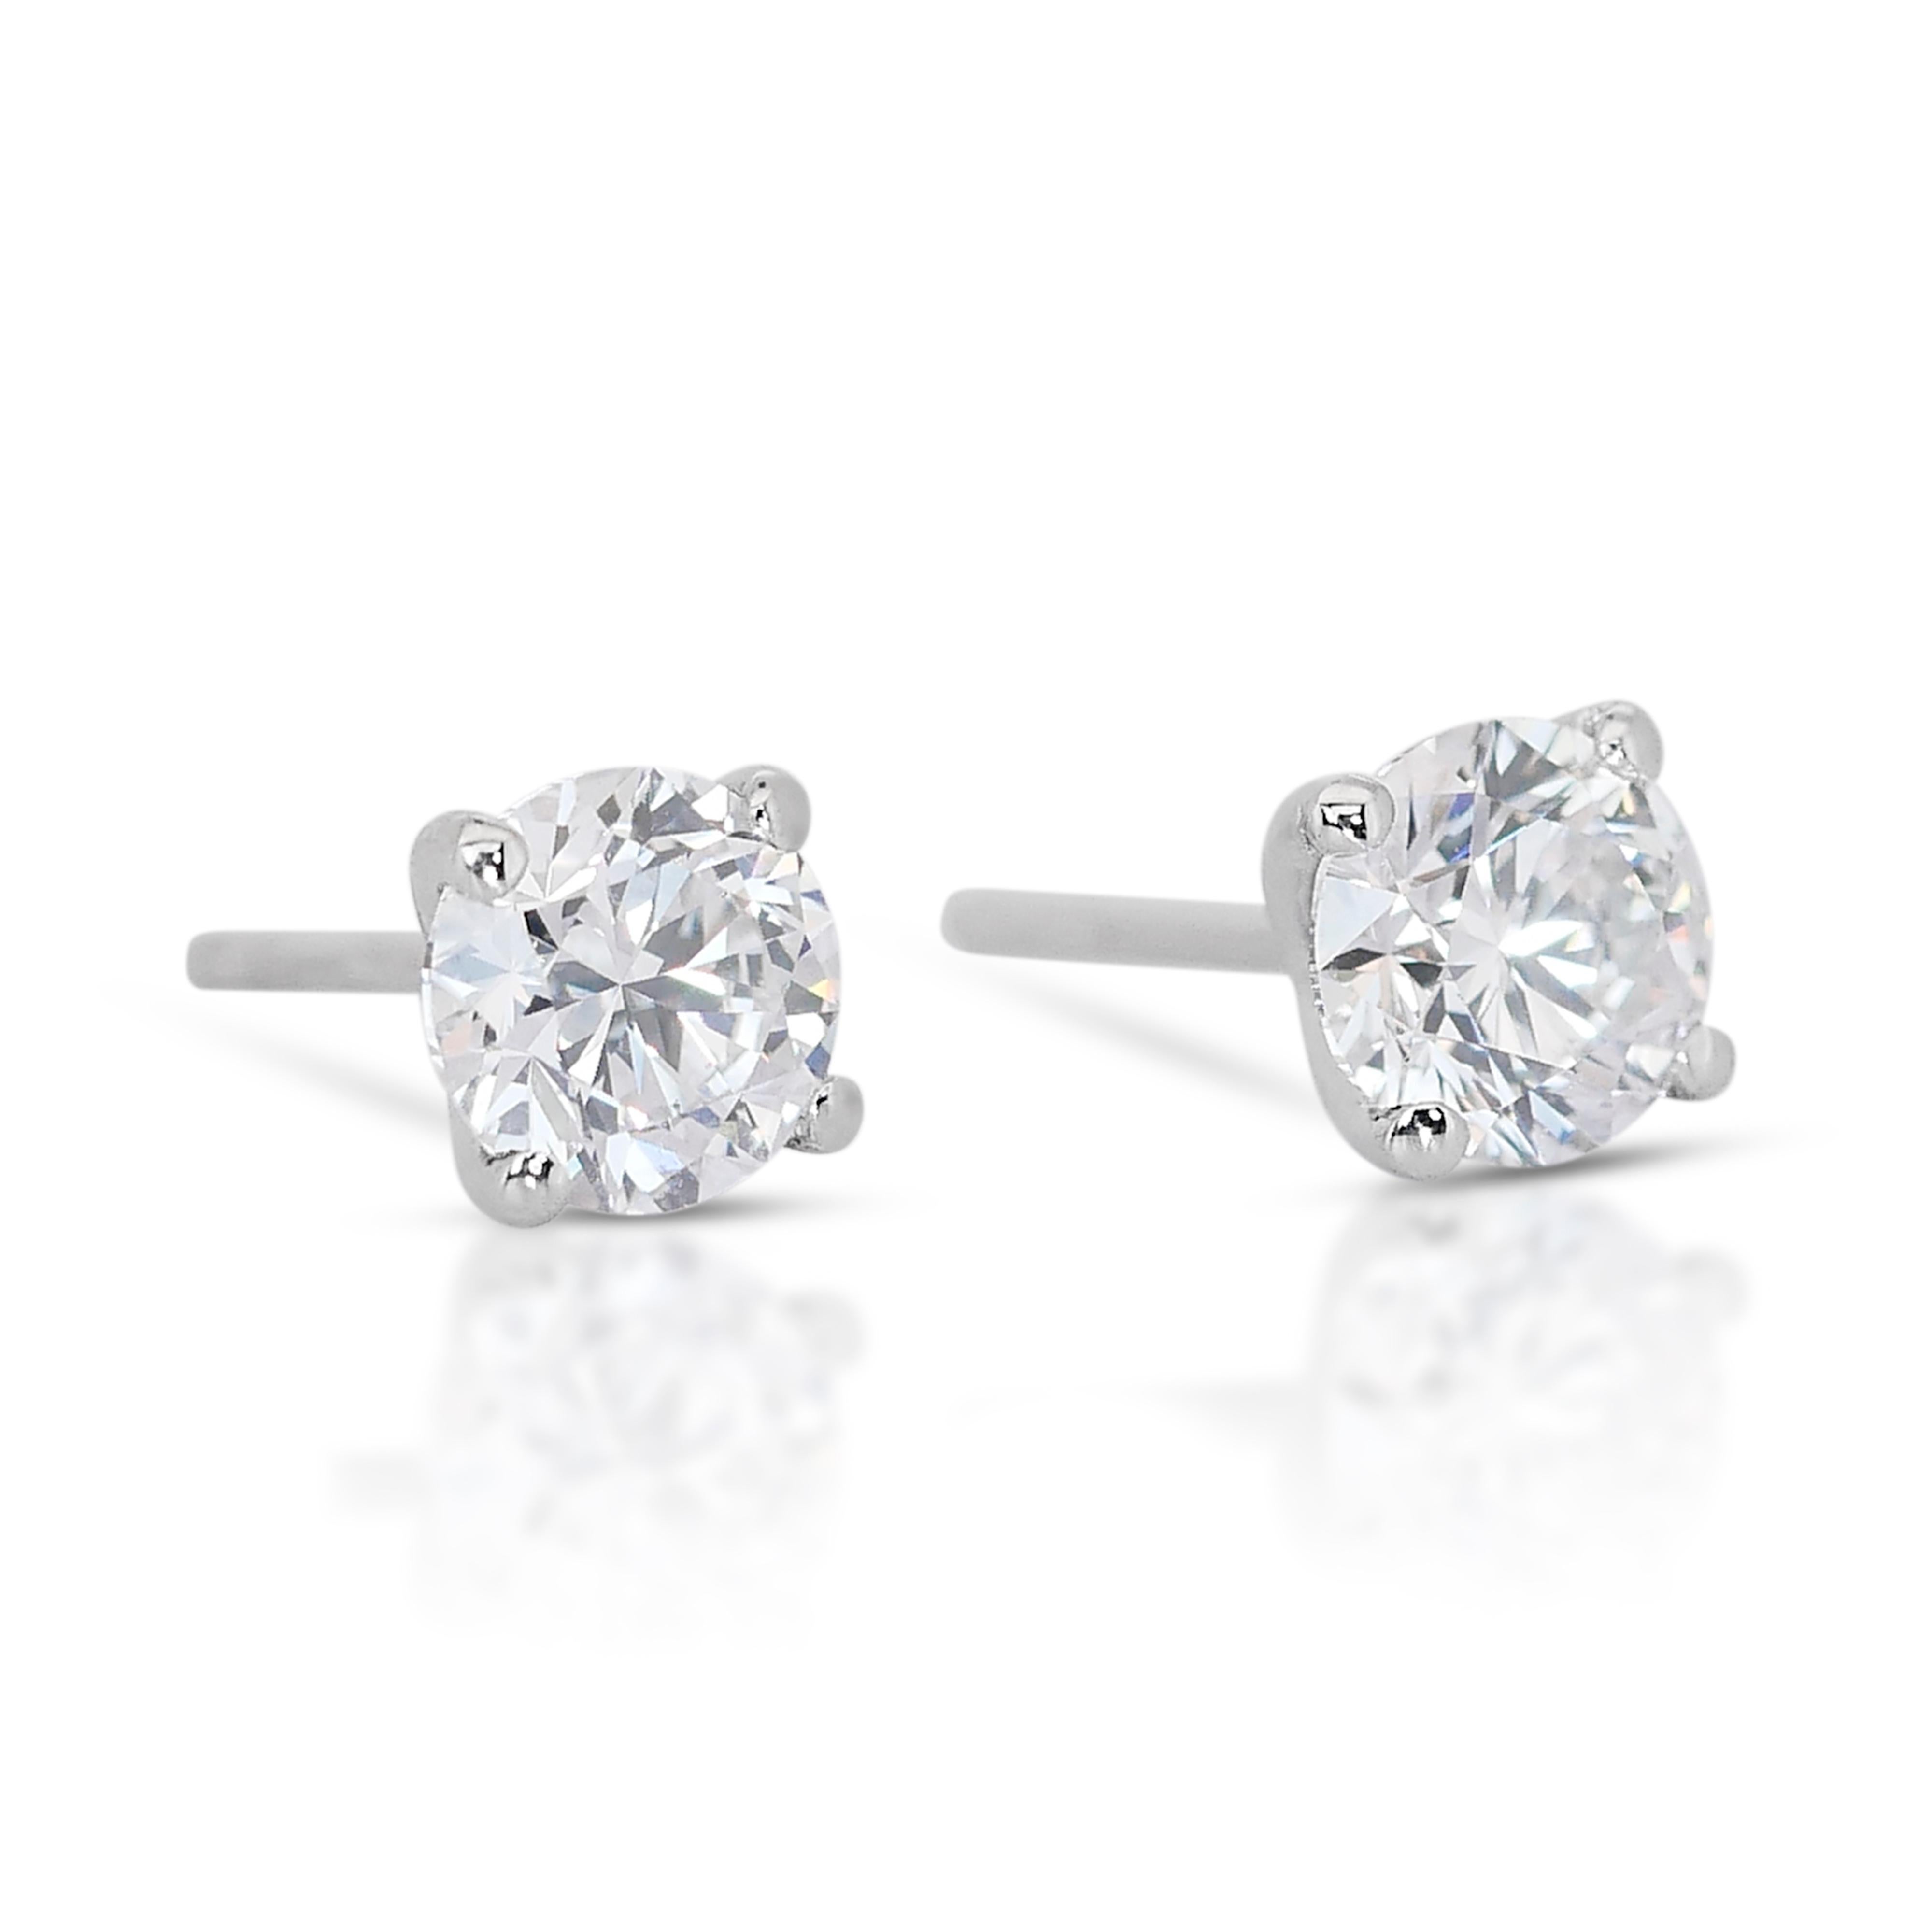 Gleaming 18K White Gold Diamond Stud Earrings with 1.8ct- GIA Certified In New Condition For Sale In רמת גן, IL